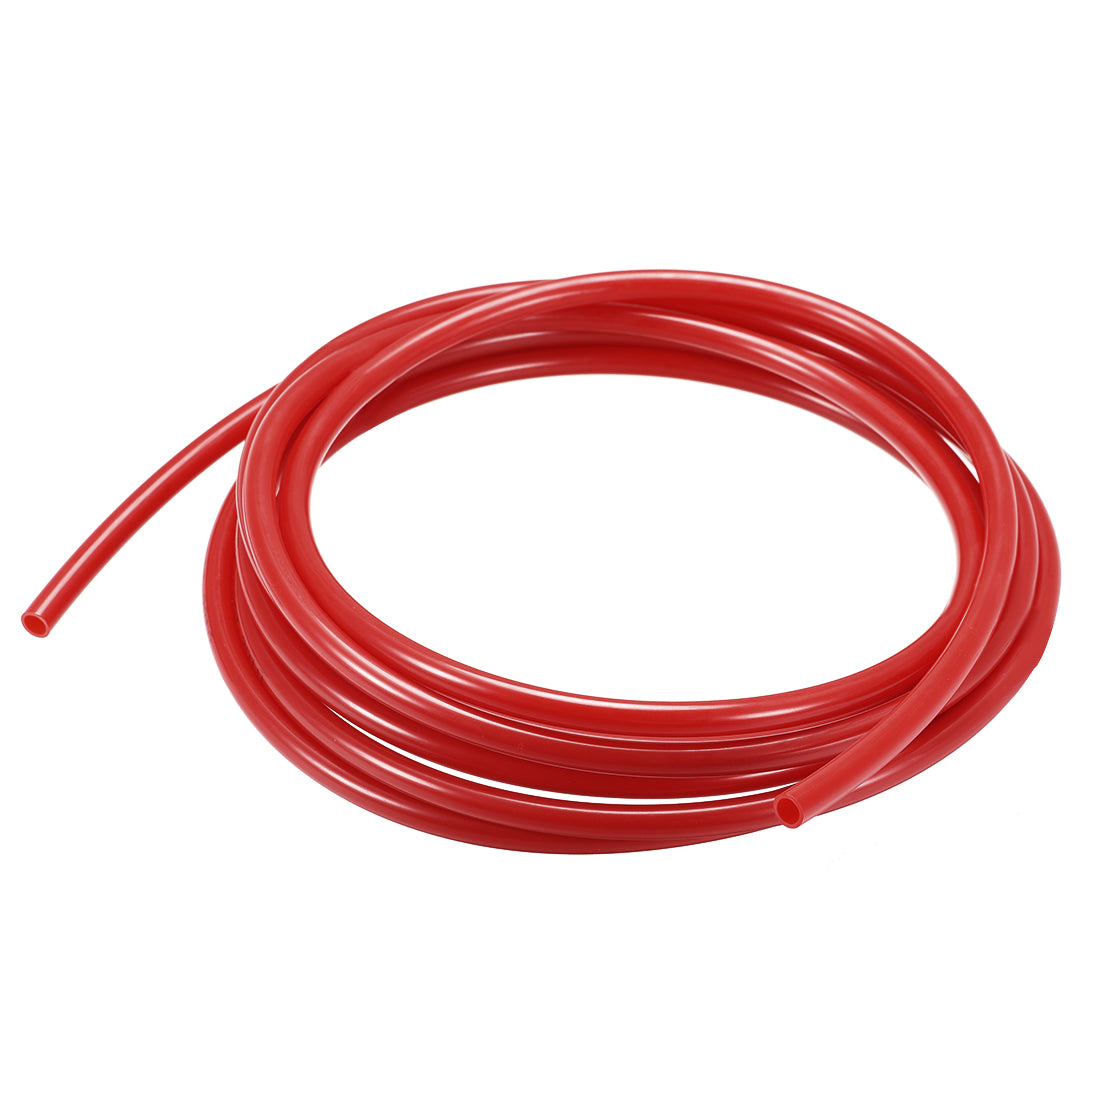 Uxcell Uxcell 8mm OD 6mm ID 4m Long PA12 Nylon Tube for Air Line Brake Fluid Transfer Red